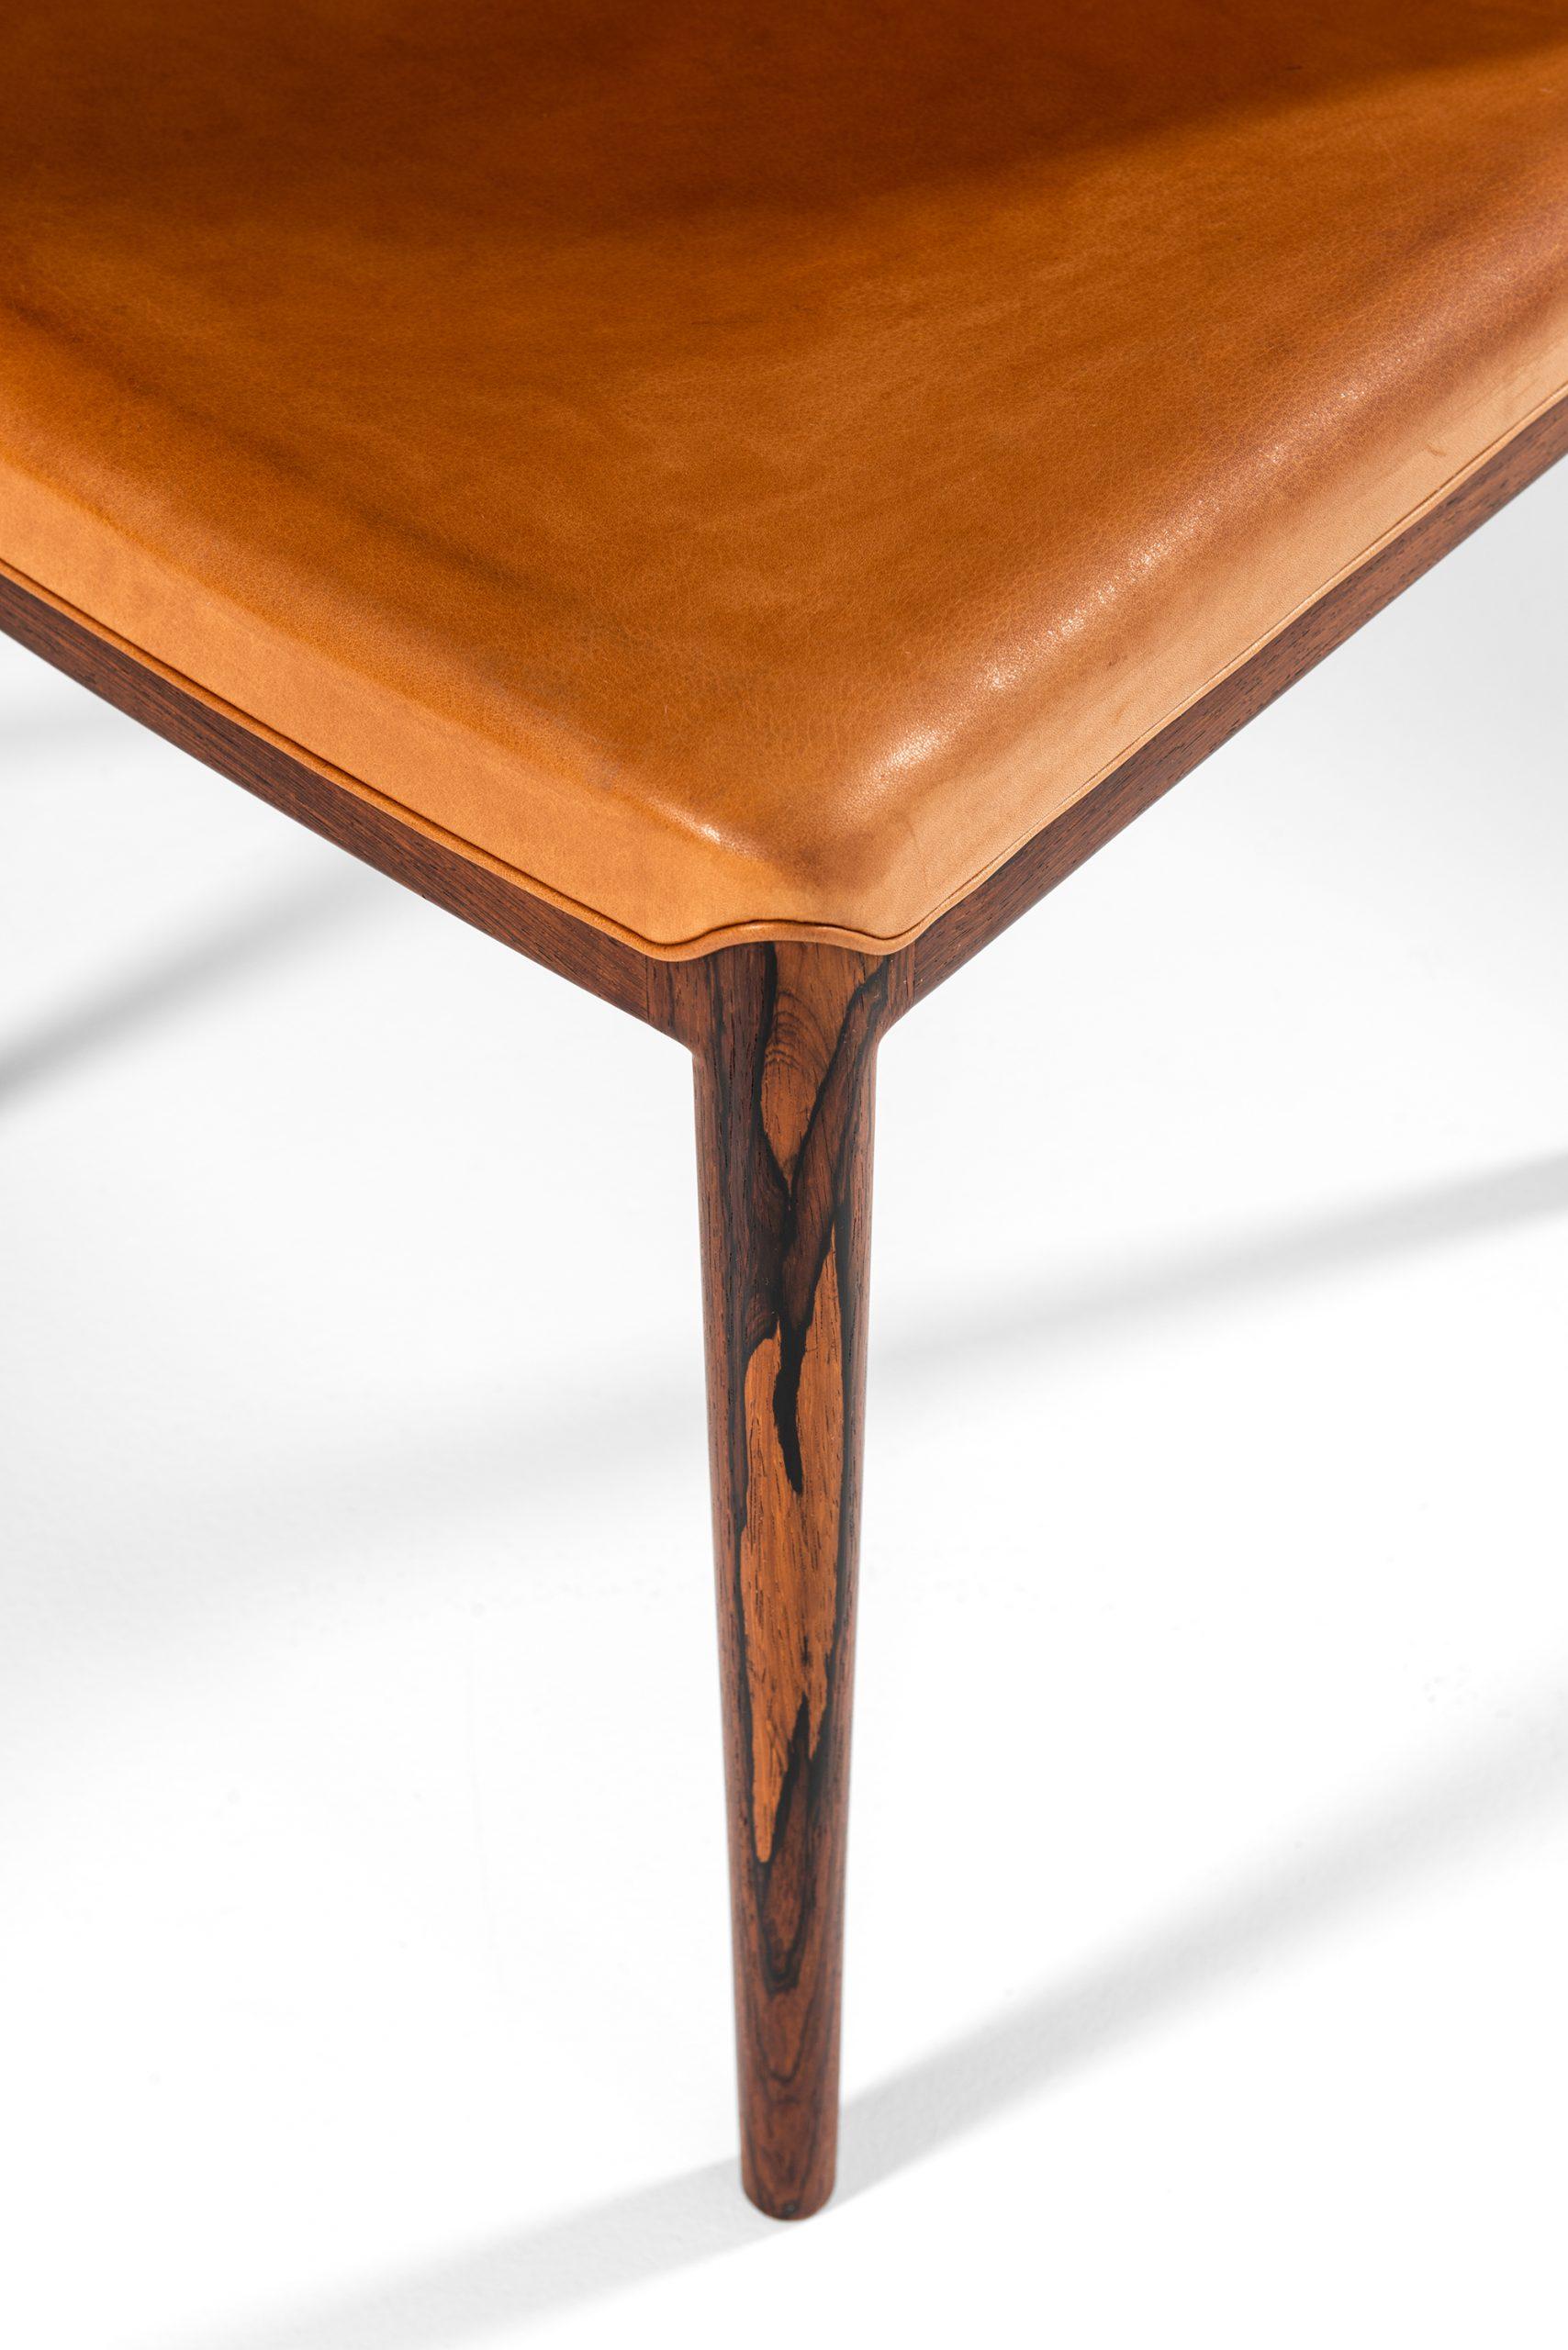 Leather Helge Vestergaard Jensen Dining Chairs Produced by P. Jensen & Co. Cabinetmakers For Sale